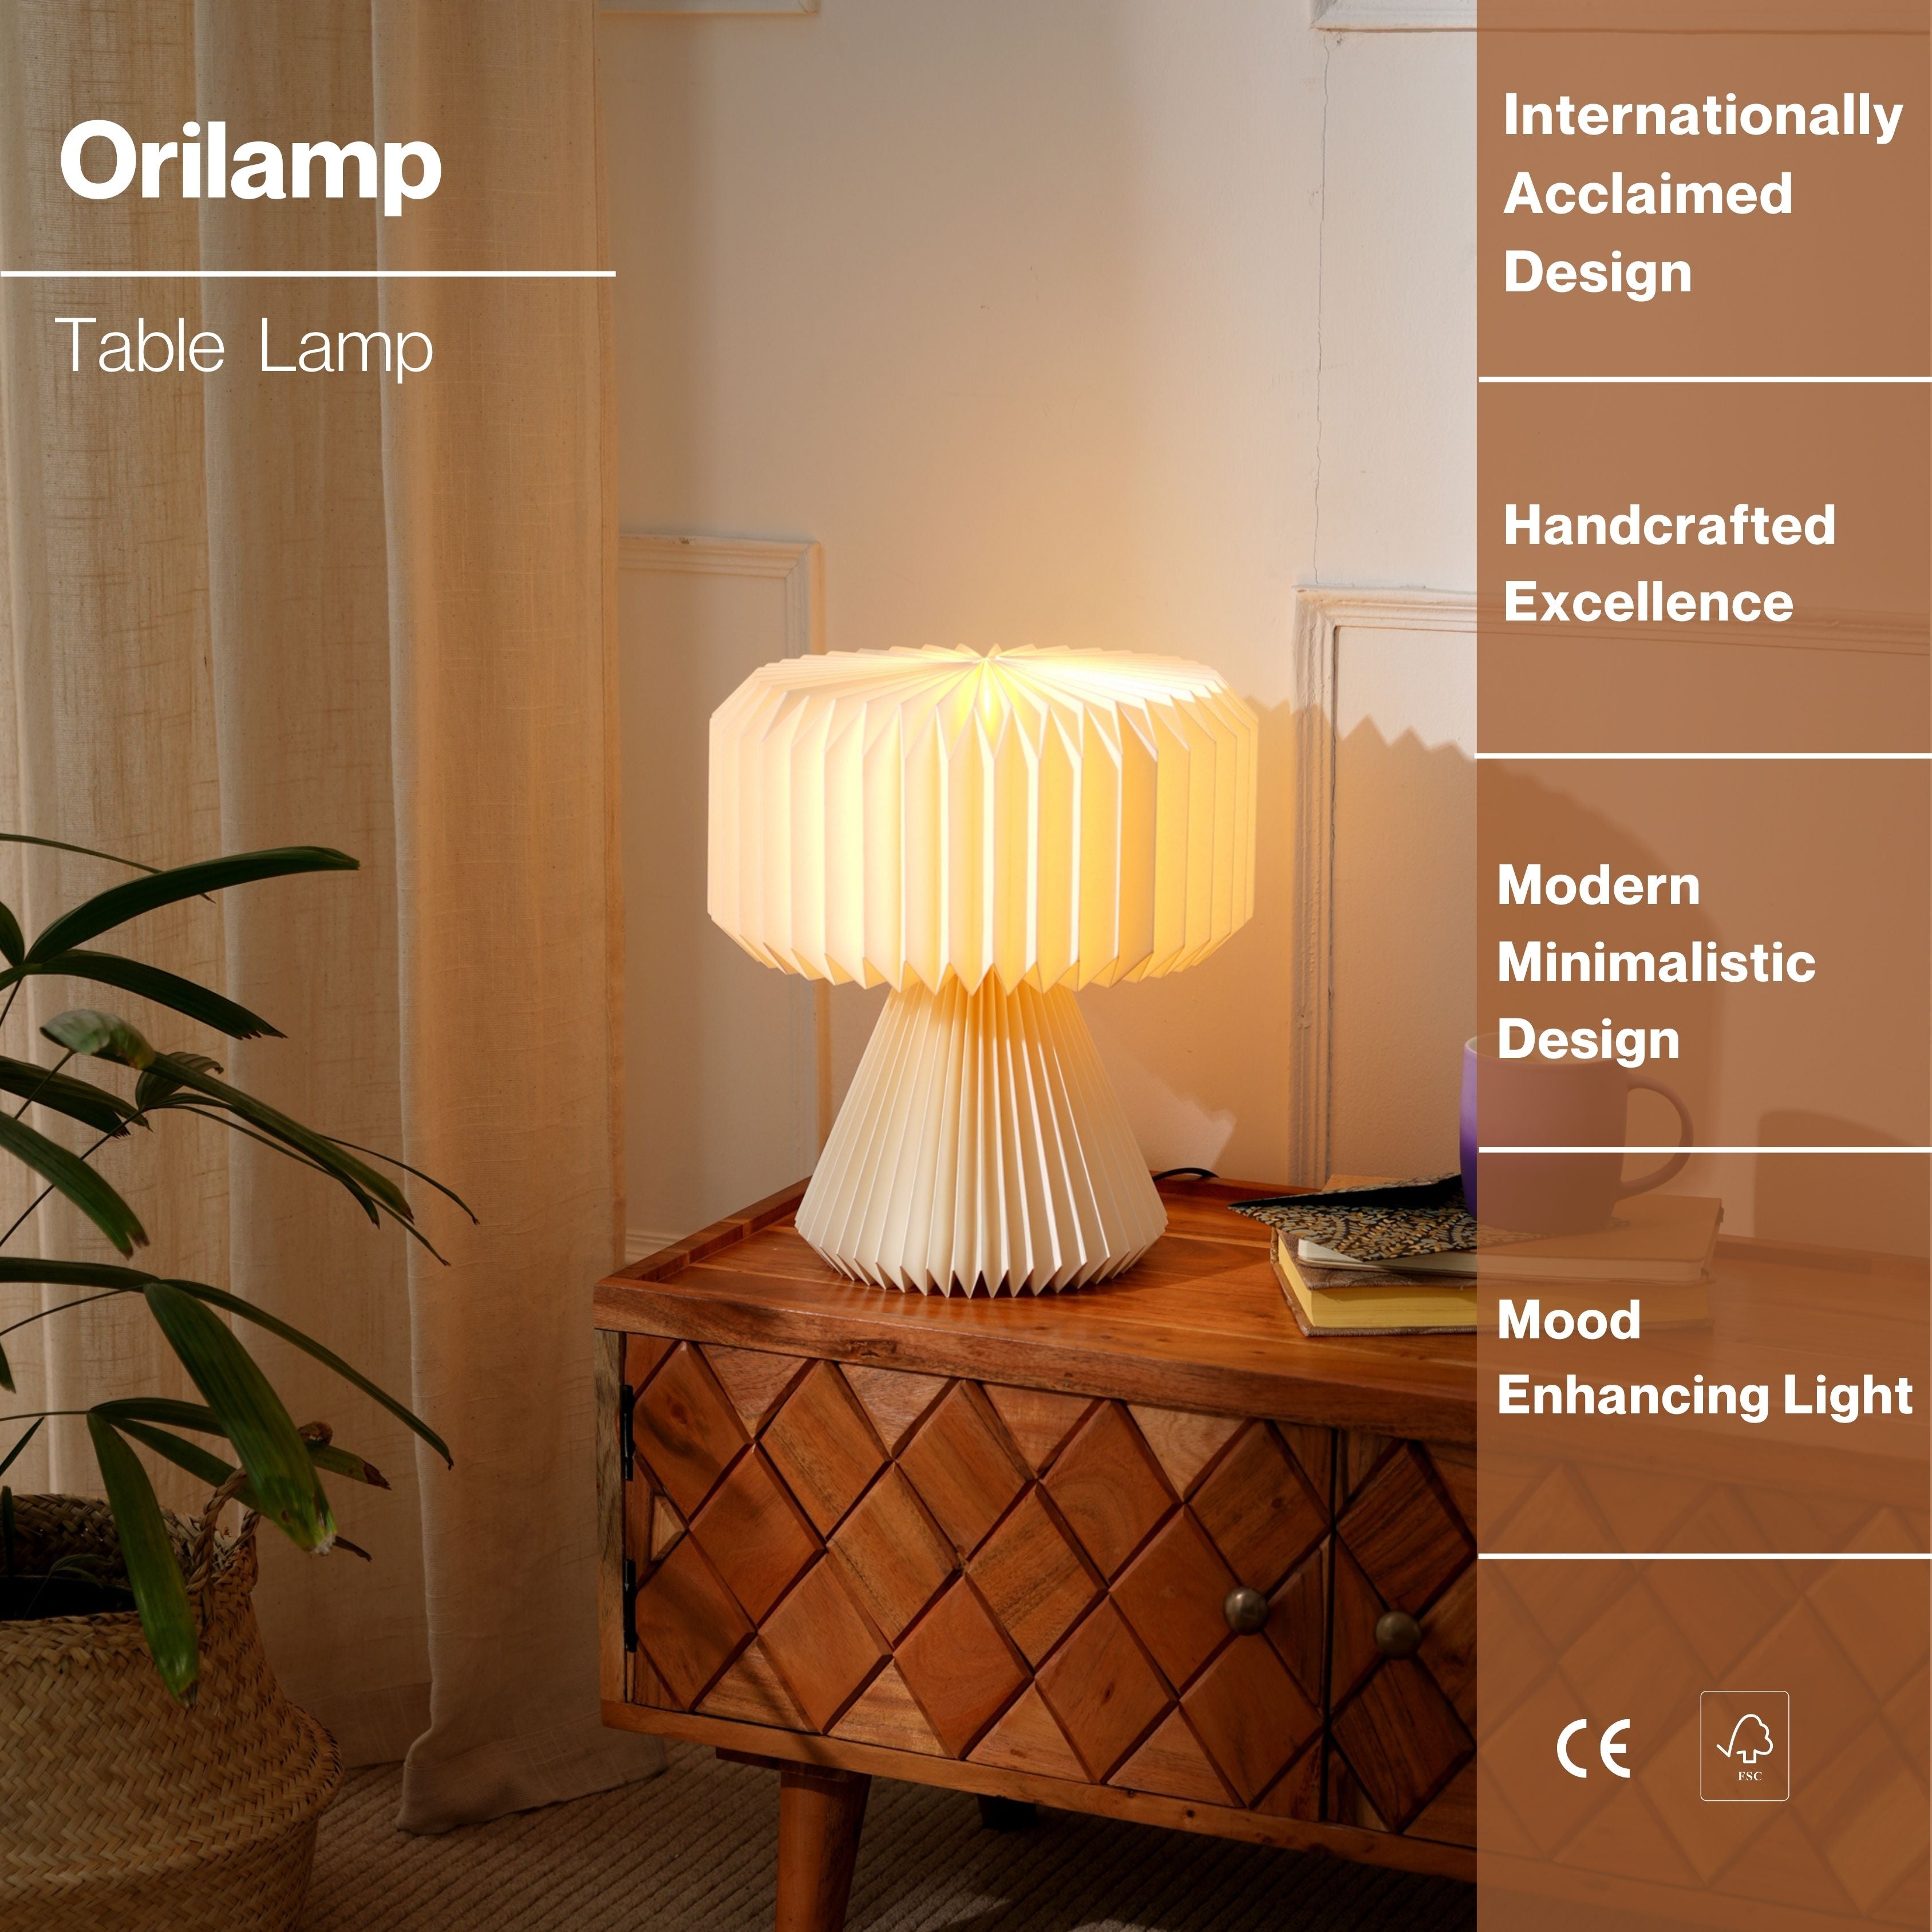 Orilamp Table Lamp - Bedside Desk Lamp, Table & Cozy Console Bedside Lamp